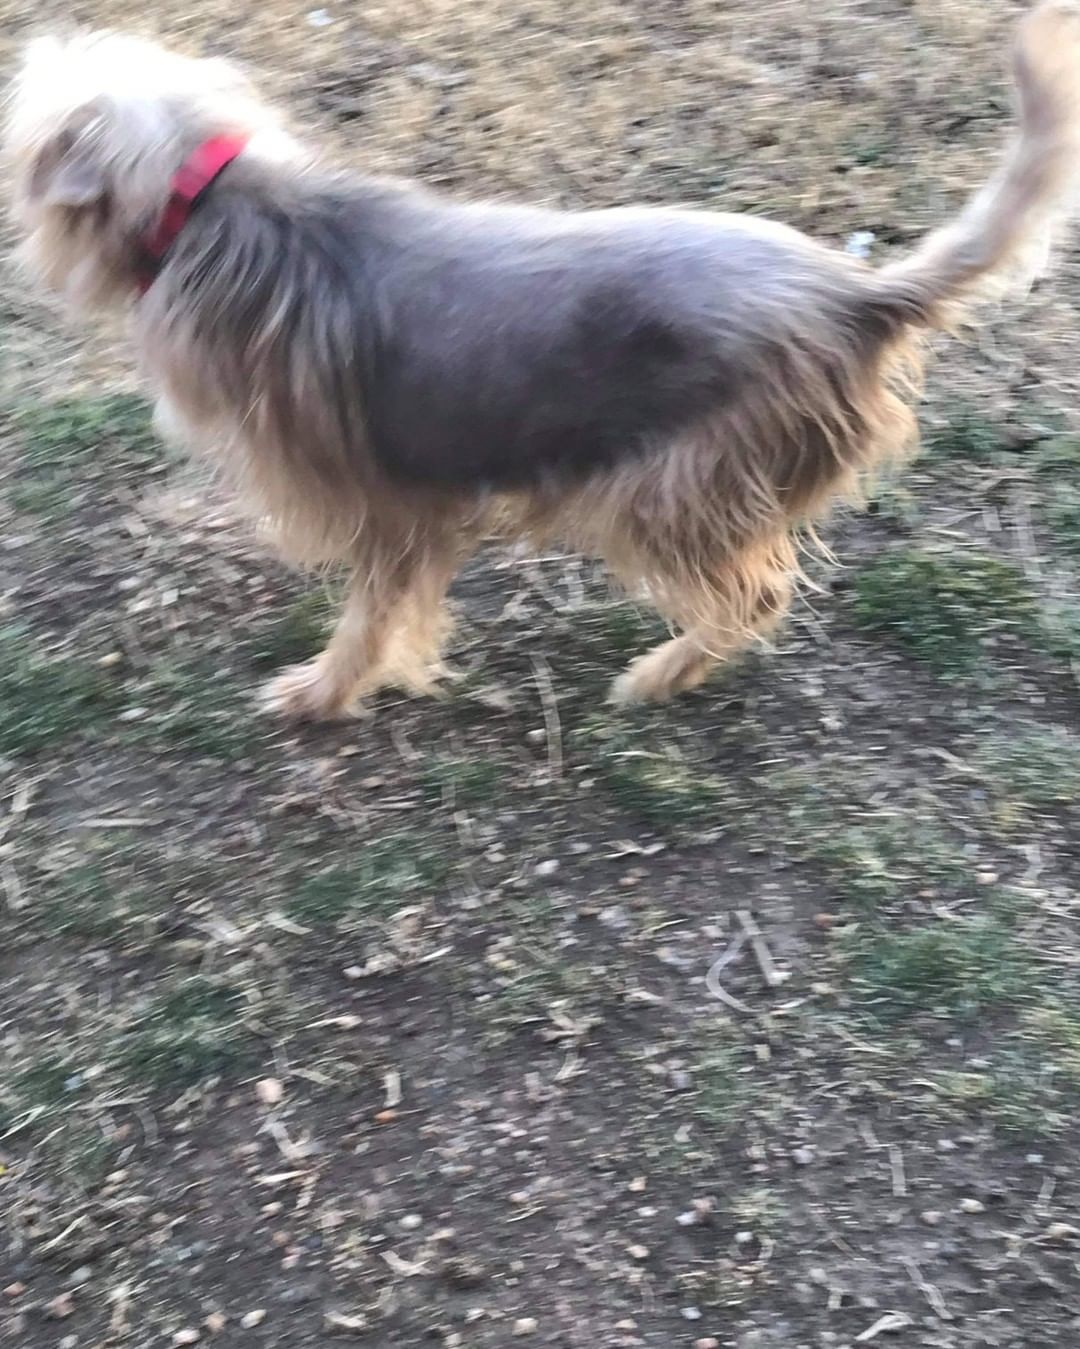 Meet Tuesday, hes a 5 year old Yorkie / Begal mix, hes 27 lbs , a little timid , but very loving and playful. 
He's  had a rough home life, its time he found his furever  home.

He's allergic to chicken , so he's got hair loss. We've  changed his diet and put him on lamb and rice. No more itching , hair is growing back

He gets along with other dogs, timid but warms up. 

Tuesday is  current on all vaccinations,  hes Heartworm  negative, has had his 1 year Heartworm  prevention in October .